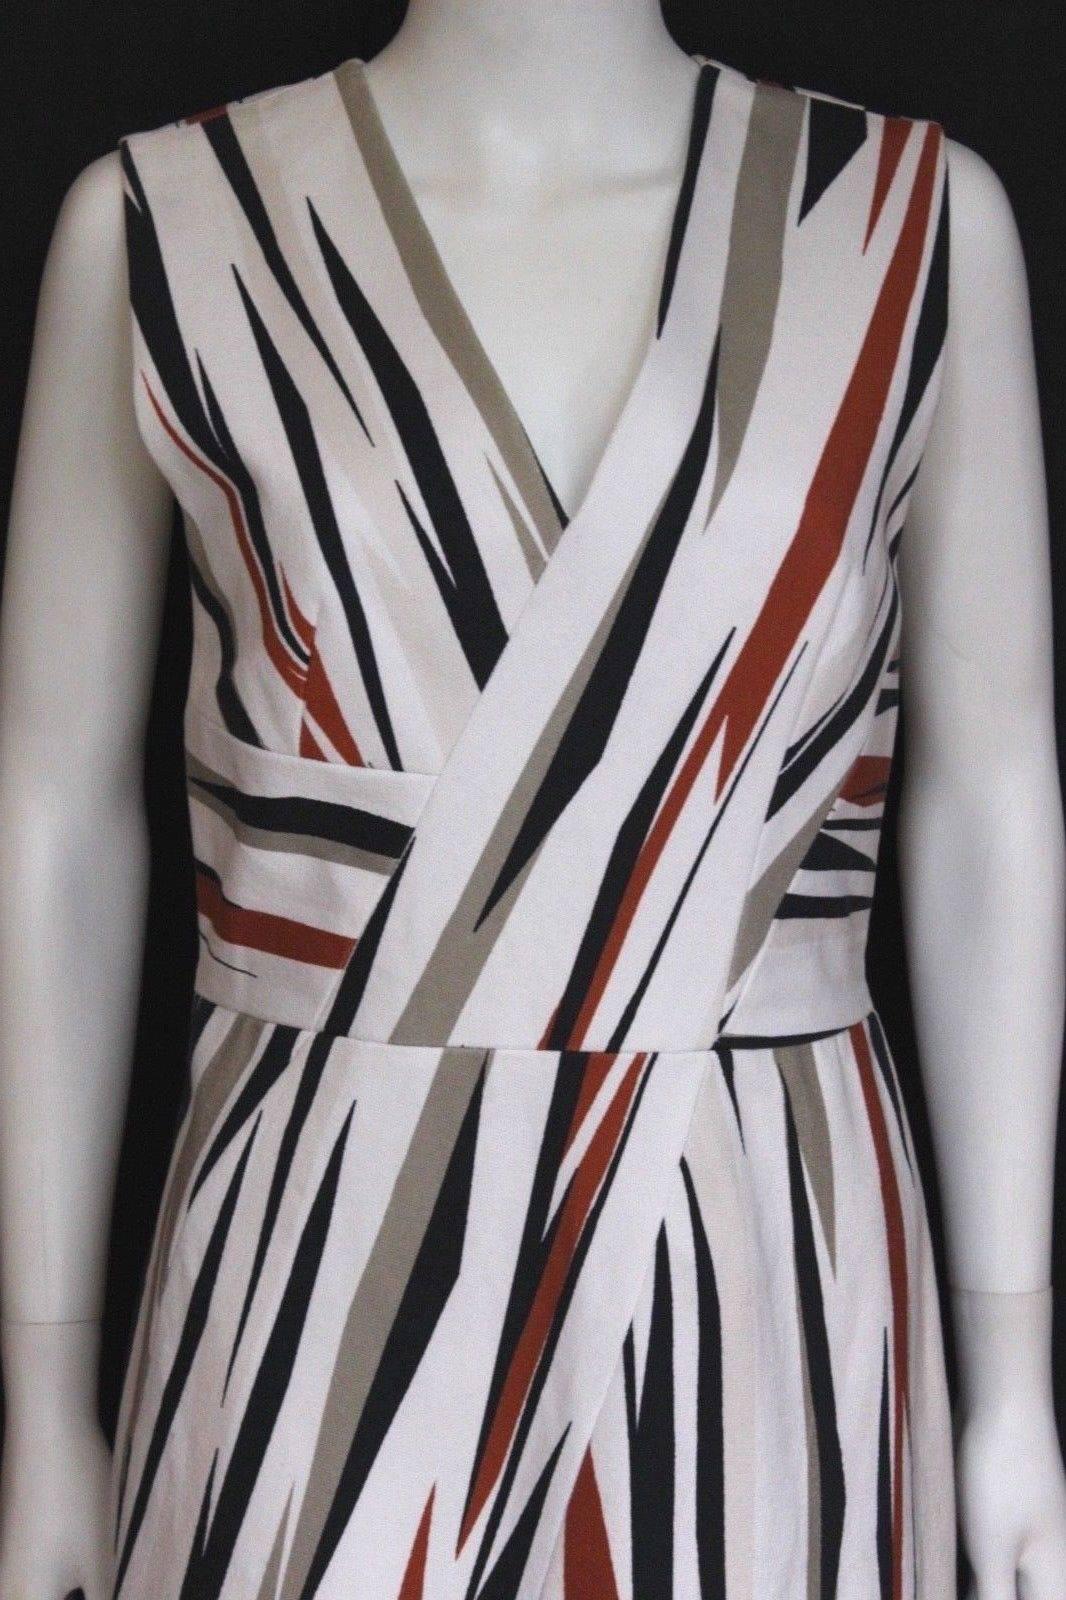 New Bottega Veneta Cotton striped Dress 42 uk 10 
Rich cotton A lind dress, white with multi coloured stripes 
Midi length 
Length 45 inches, chest 17 inches across, waist 14.5 inches, hips 19.5 inches across laid flat.
Excellent new condition  
